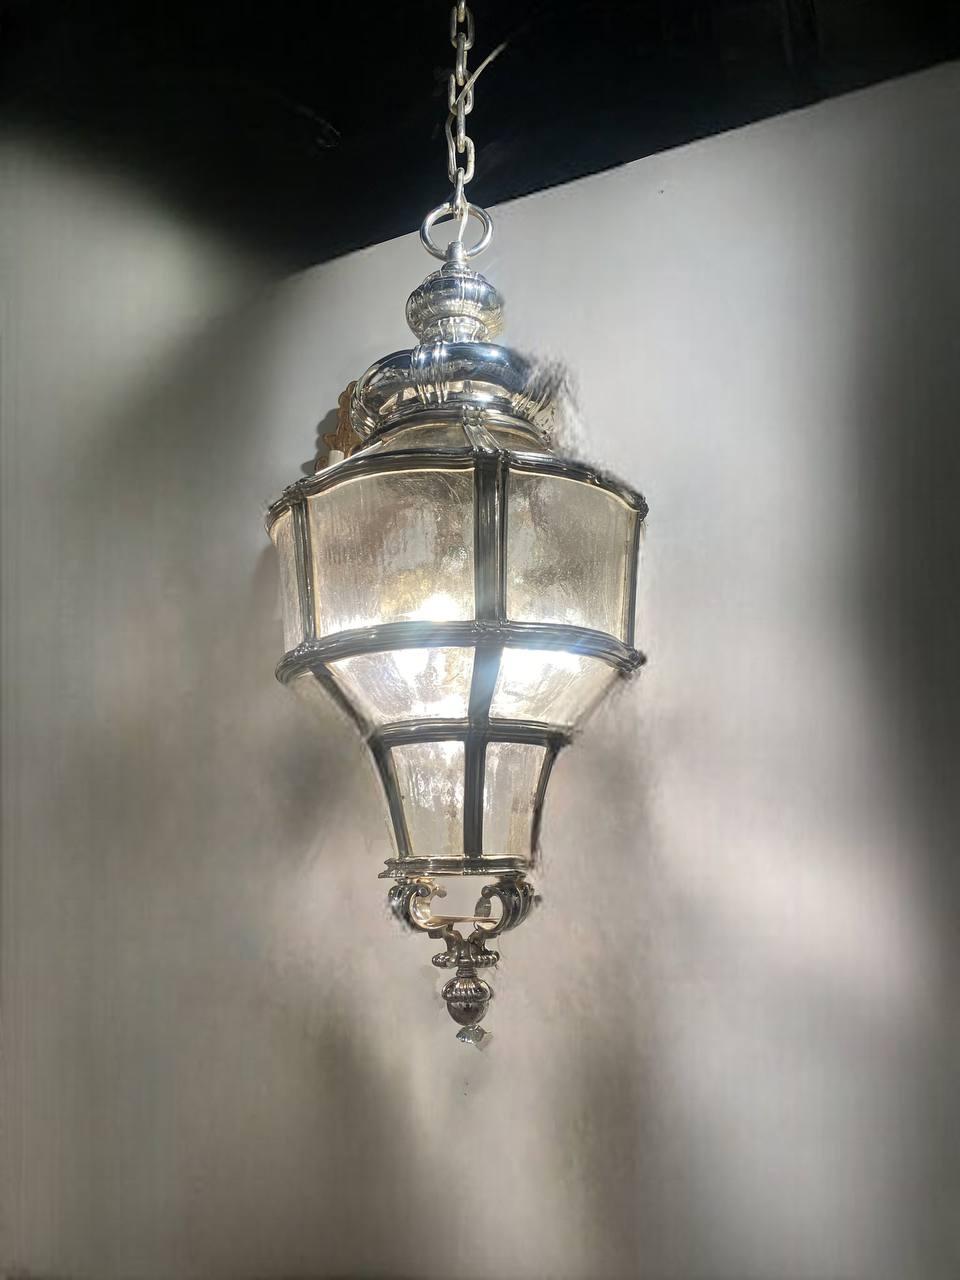 Late 19th century Silver Plated Caldwell Lantern In Good Condition For Sale In New York, NY